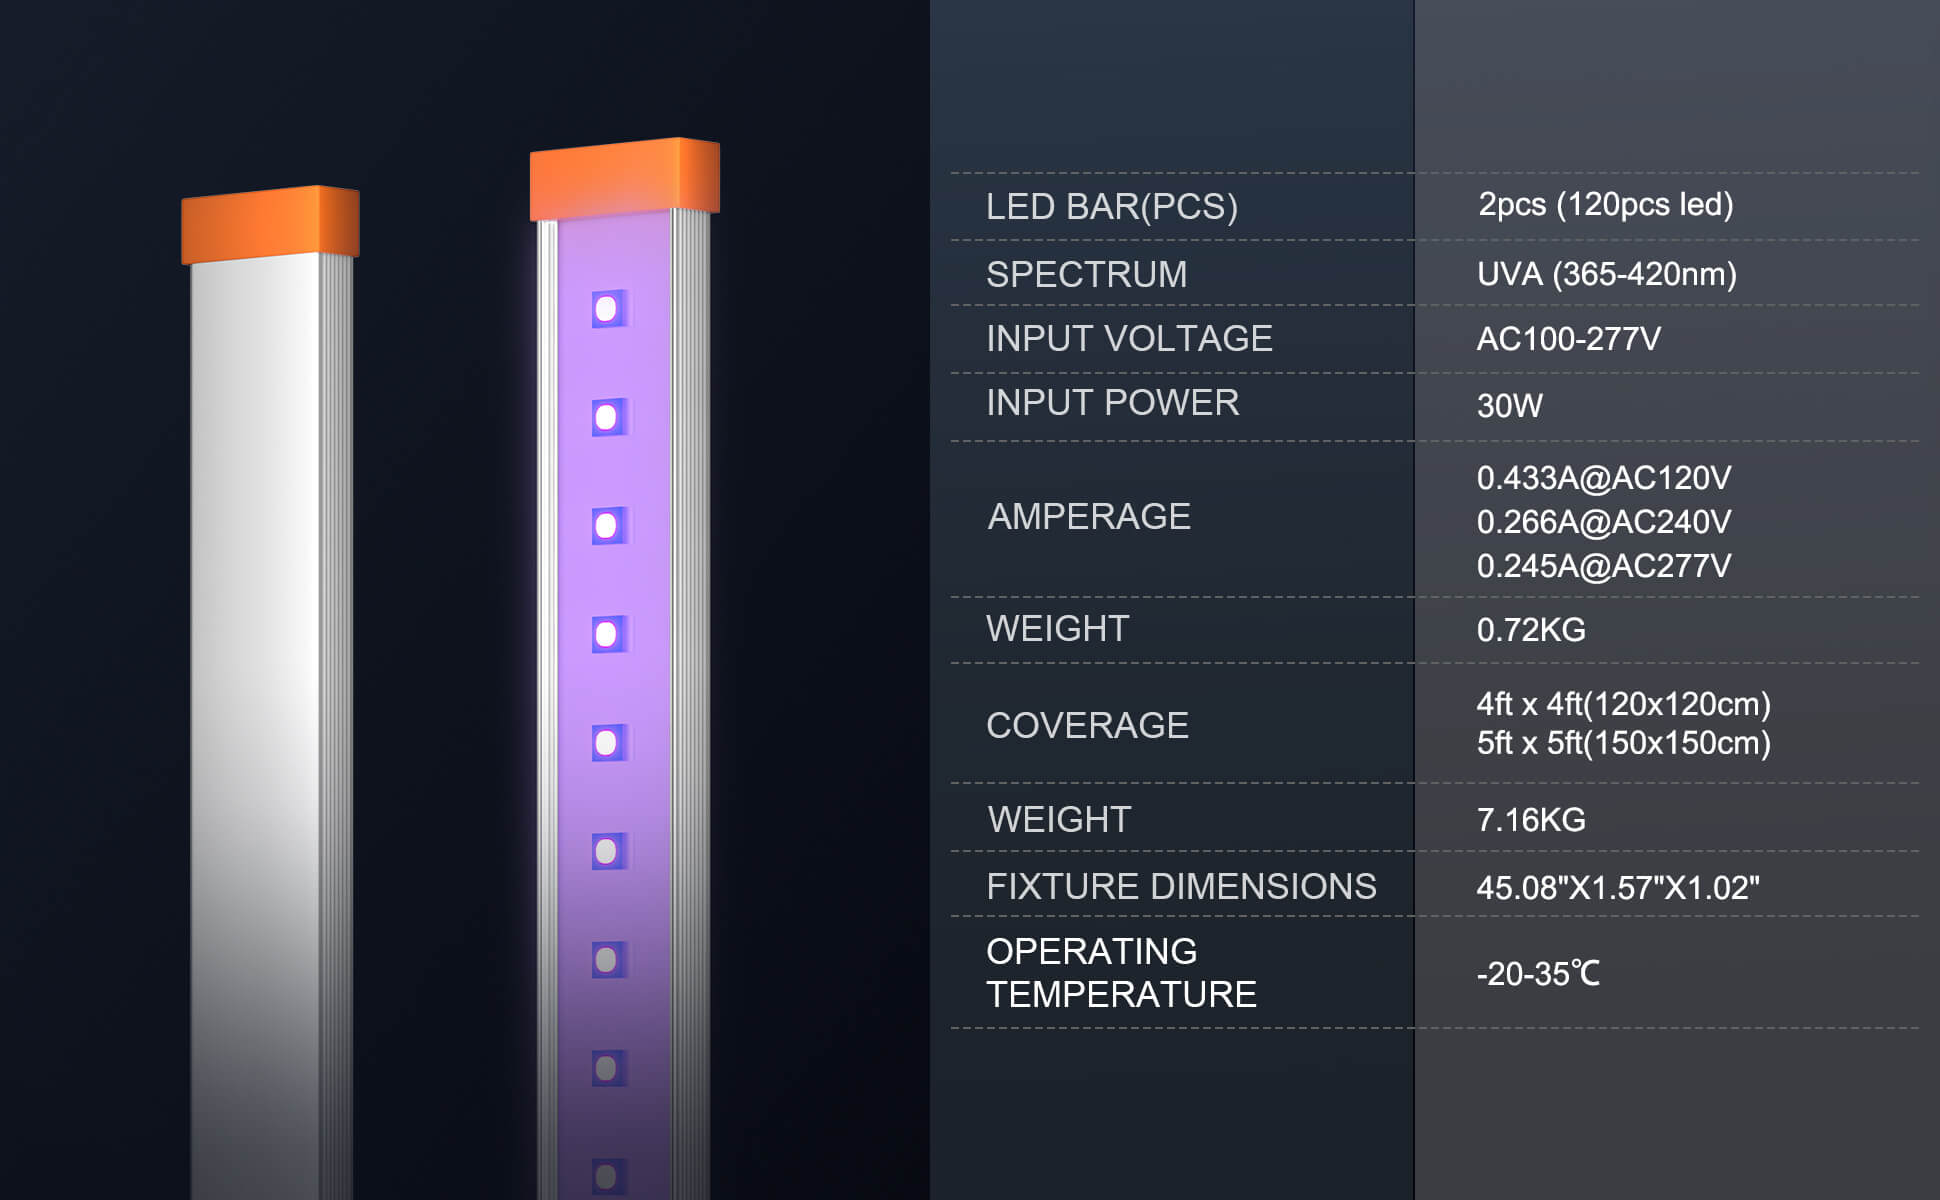 Specifications of UV30W